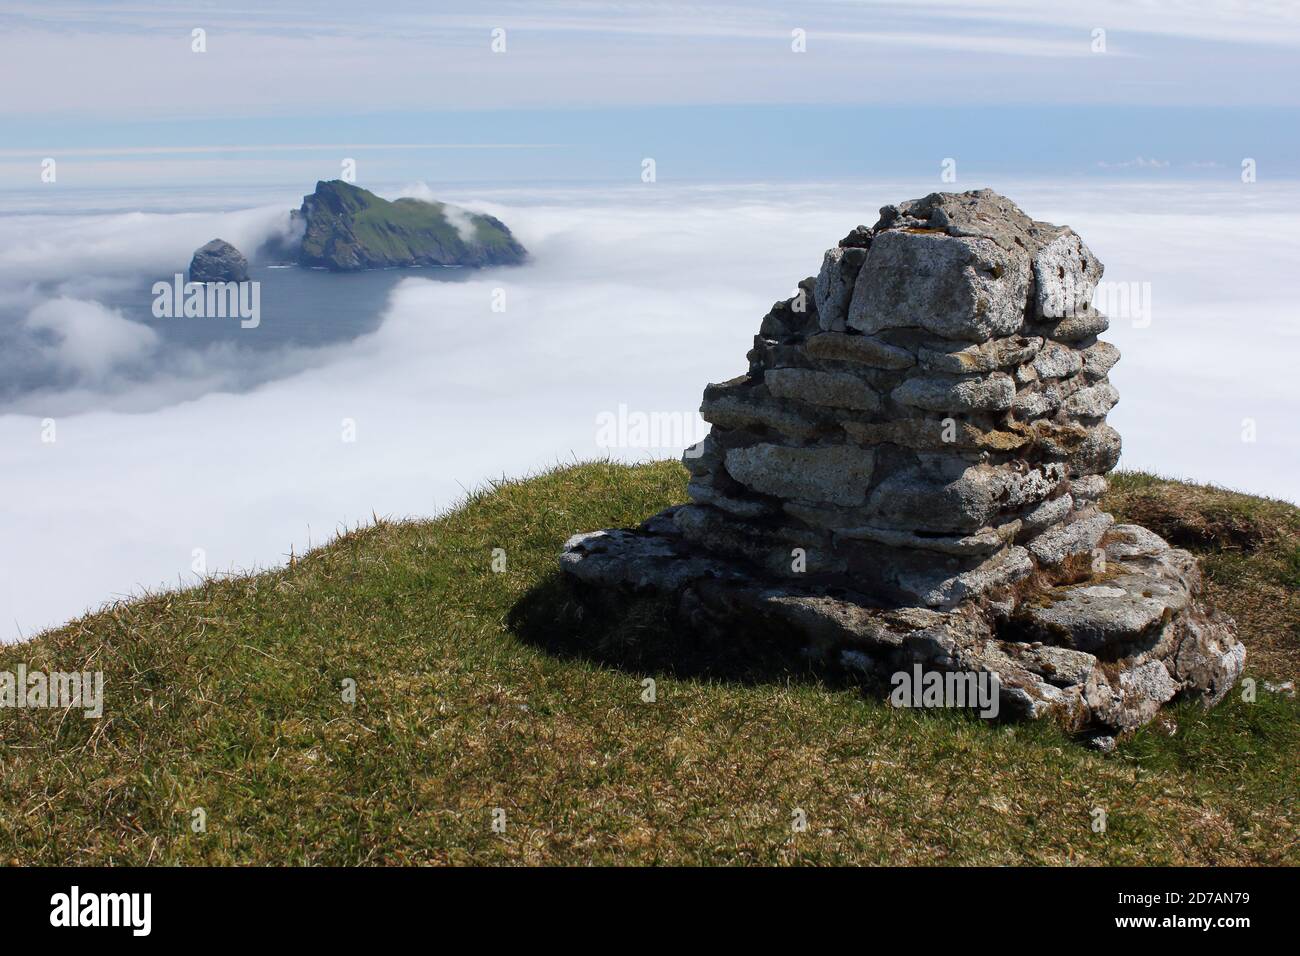 The cairn at the top of Conachair, the highest point on Hirta, St. Kilda. Stock Photo